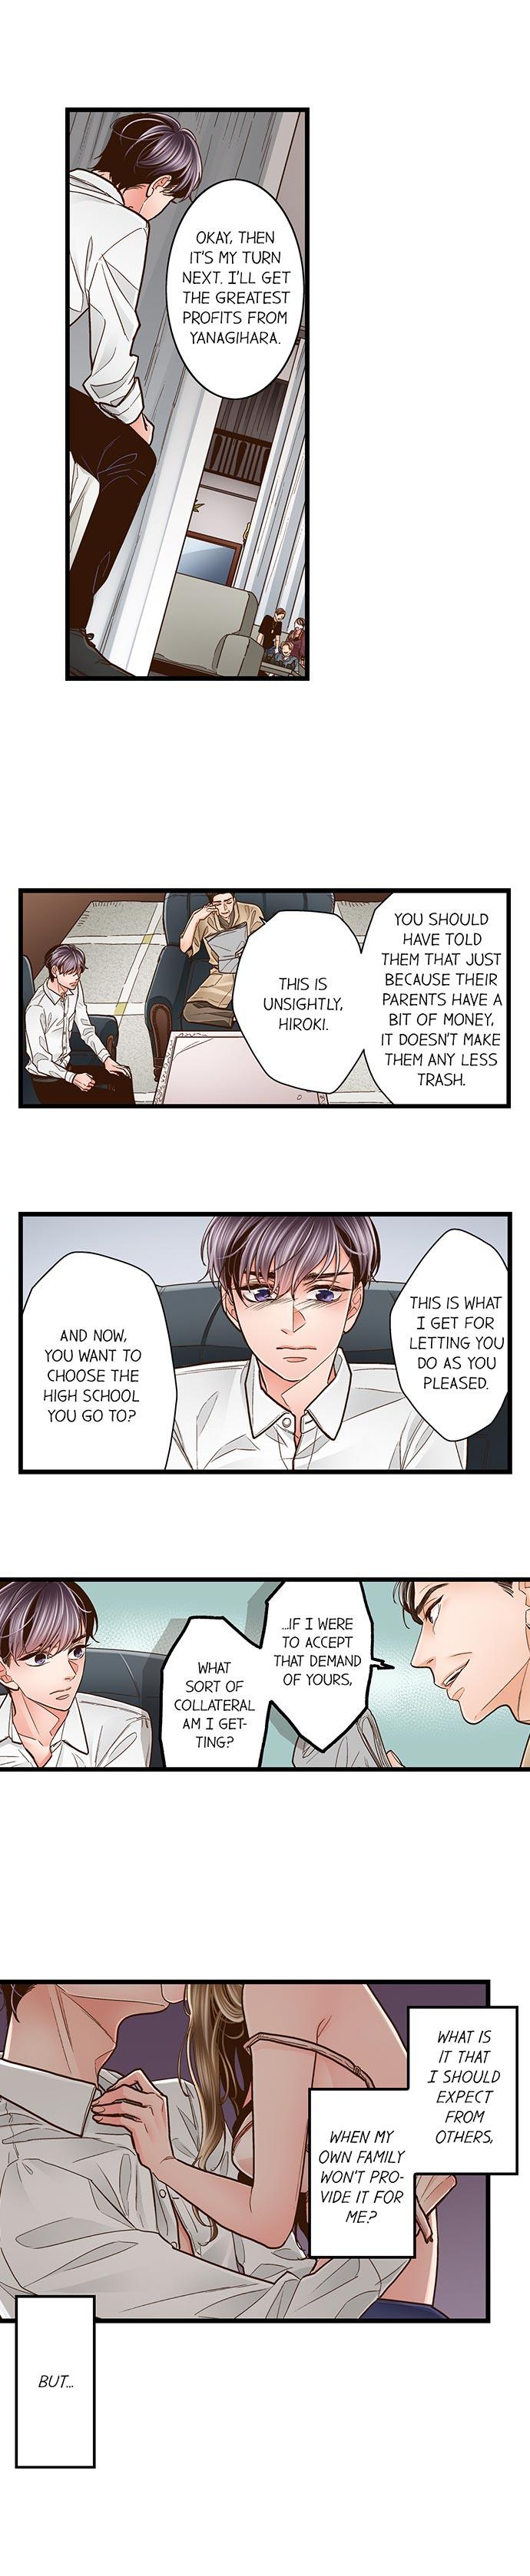 Yanagihara Is a Sex Addict - Chapter 86 Page 3